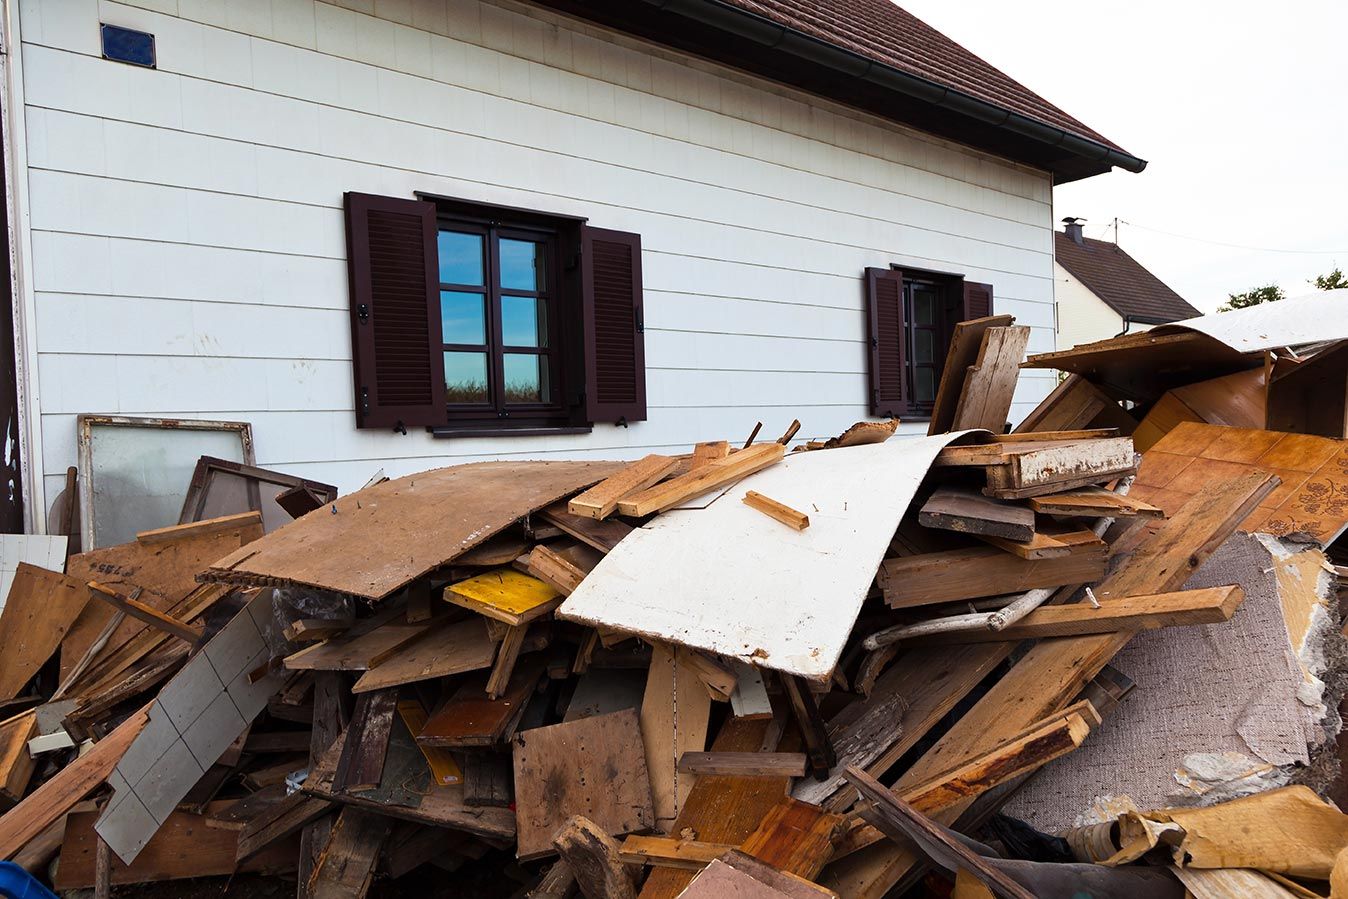 Maher Removal & Disposal offers construction debris removal services for residents and commercial businesses.